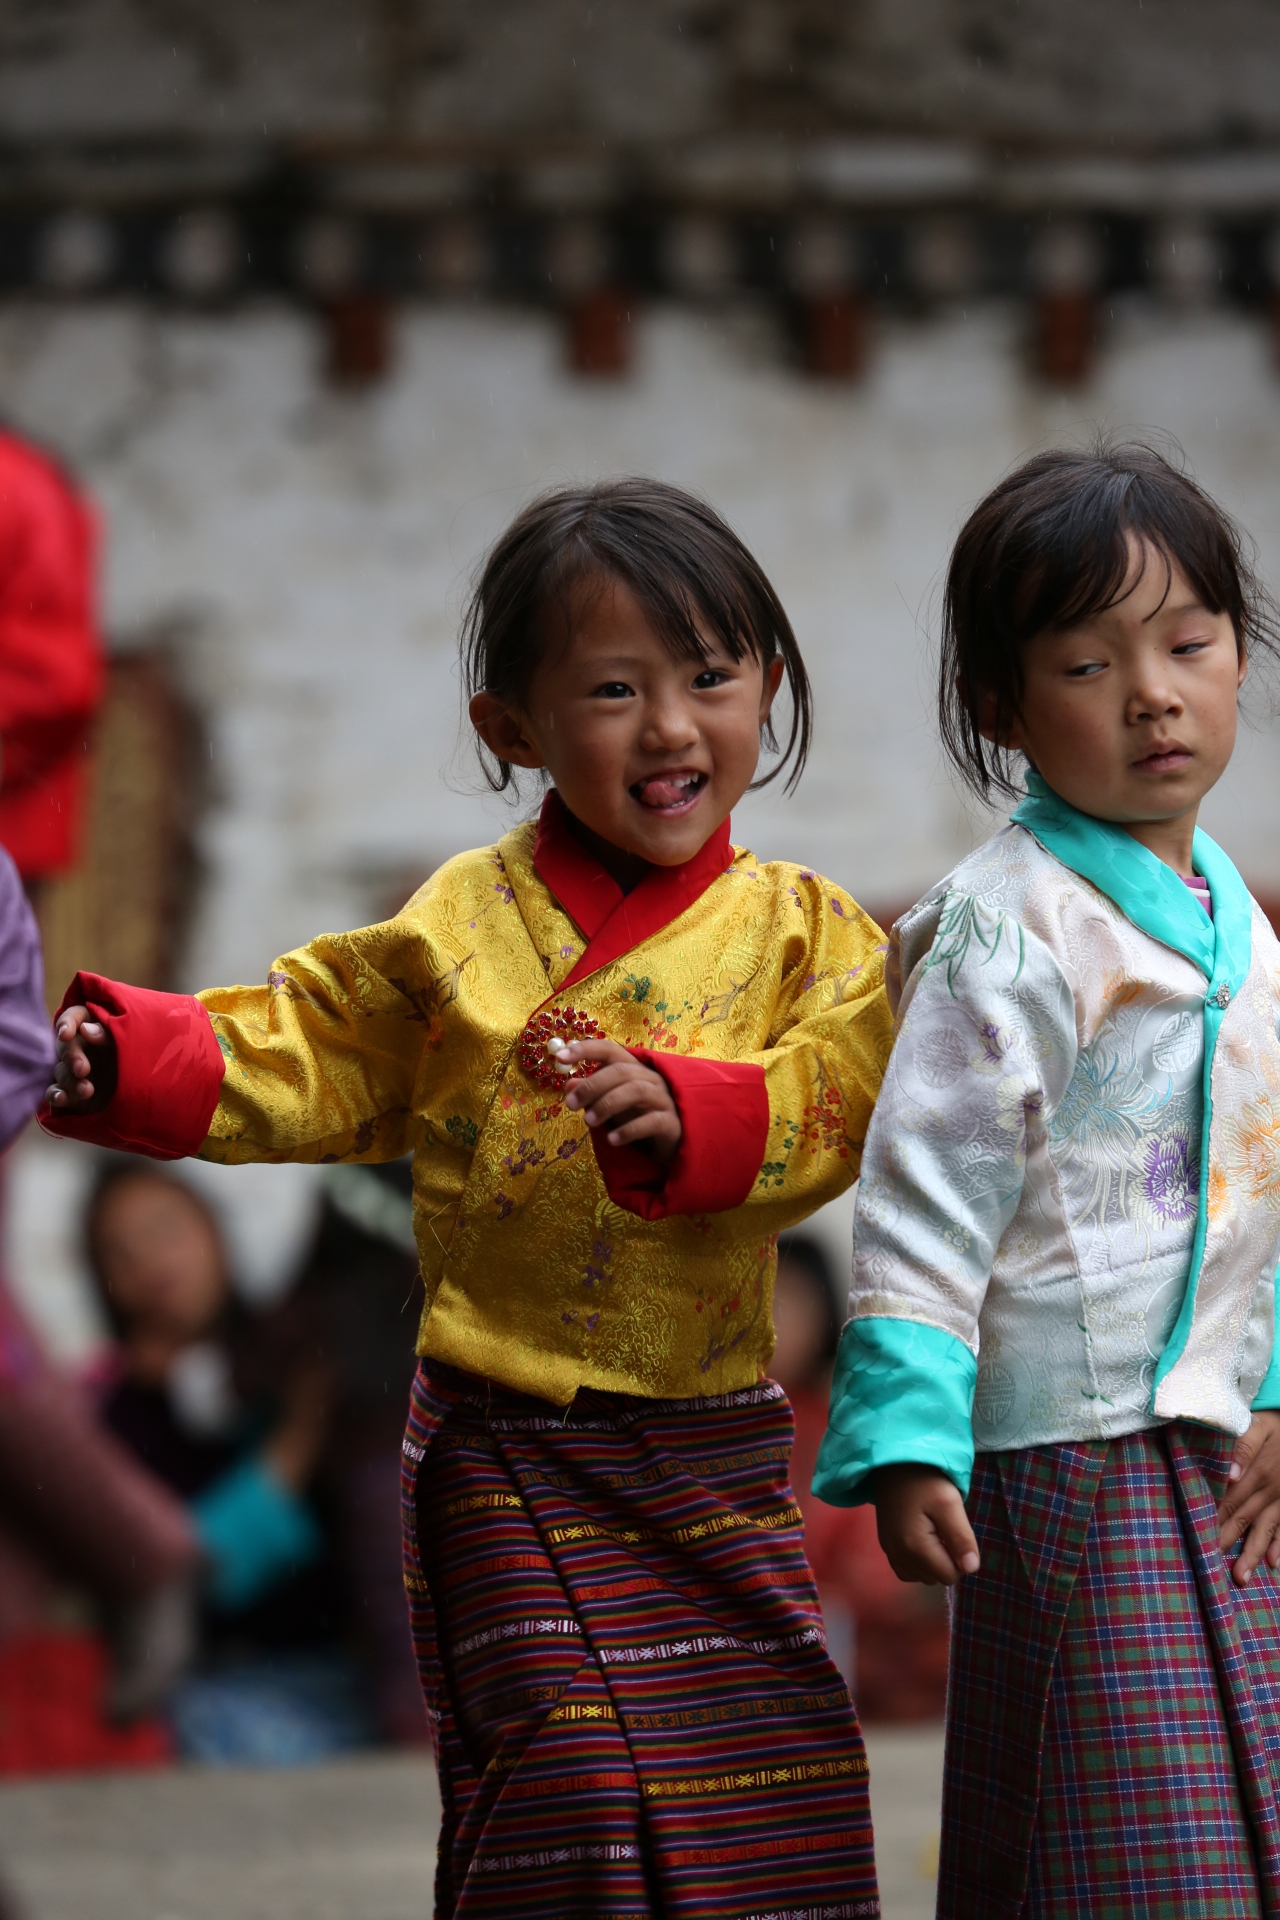 The Magical Youth of Bhutan